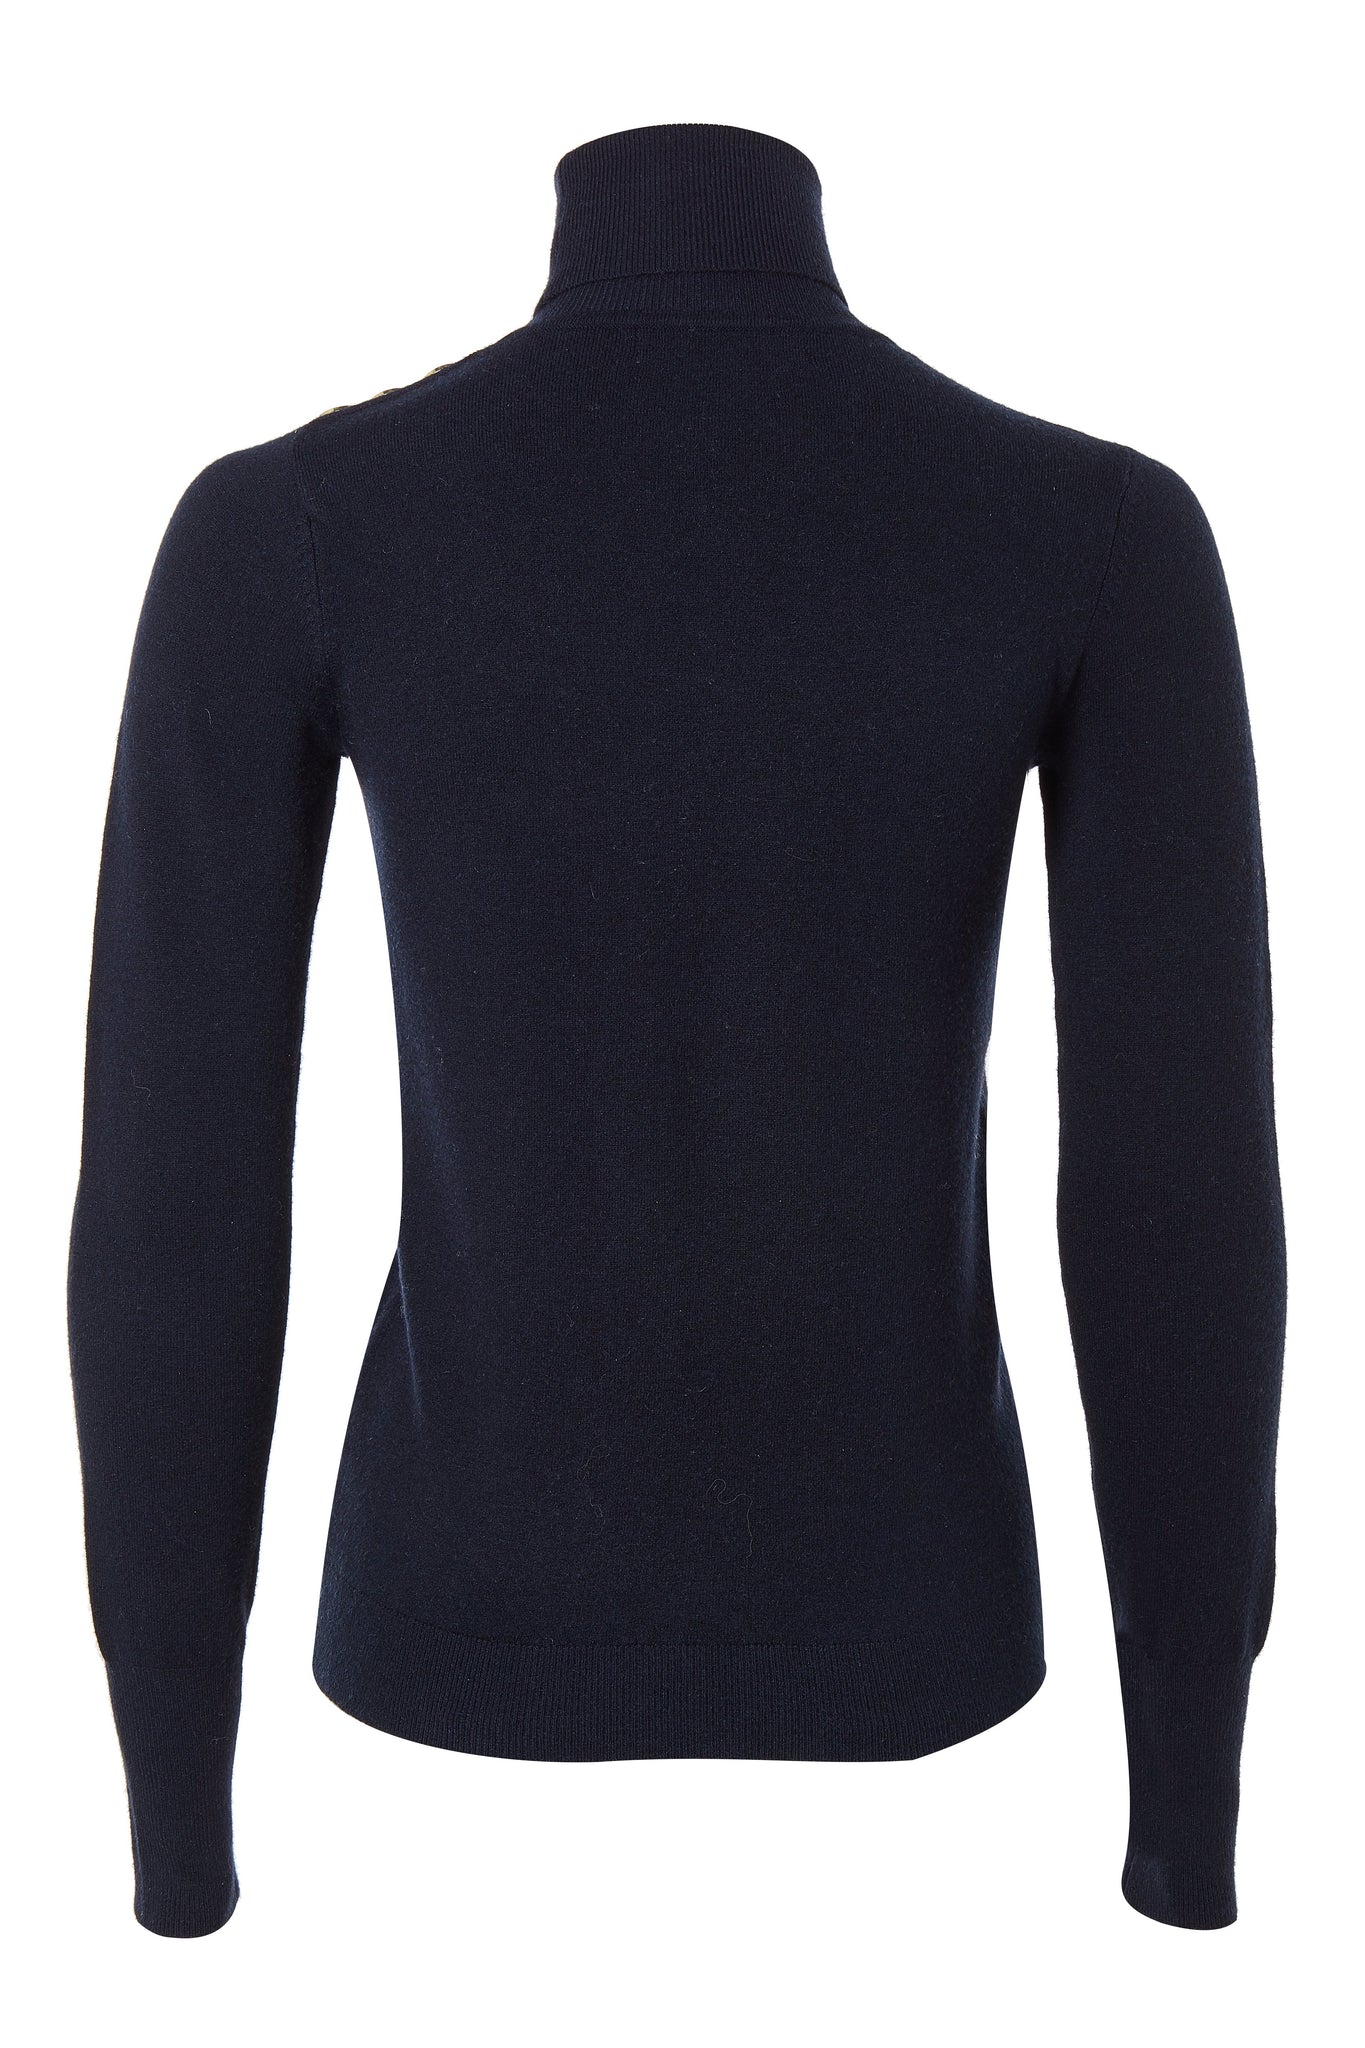 back of super soft lightweight jumper in navy with ribbed roll neck collar, cuffs and hem